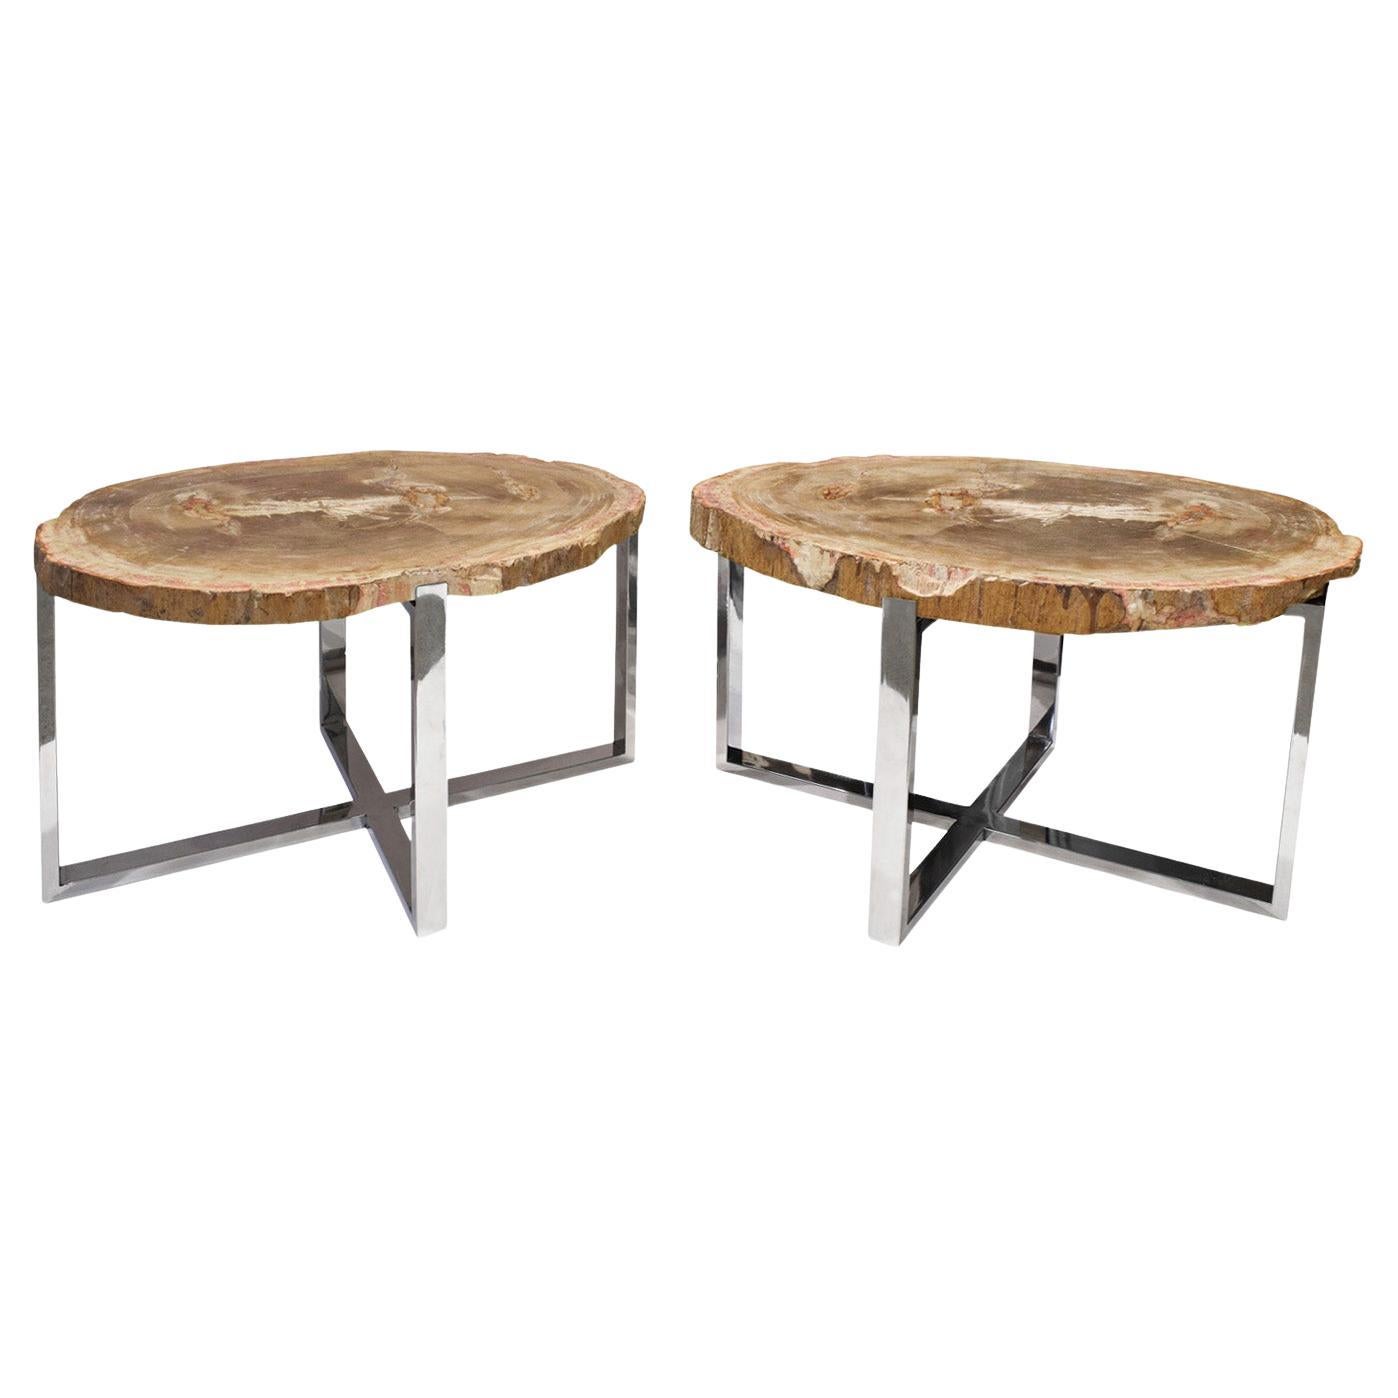 Pair of End/Coffee Tables in Polished Chrome with Petrified Wood Tops 1990s For Sale